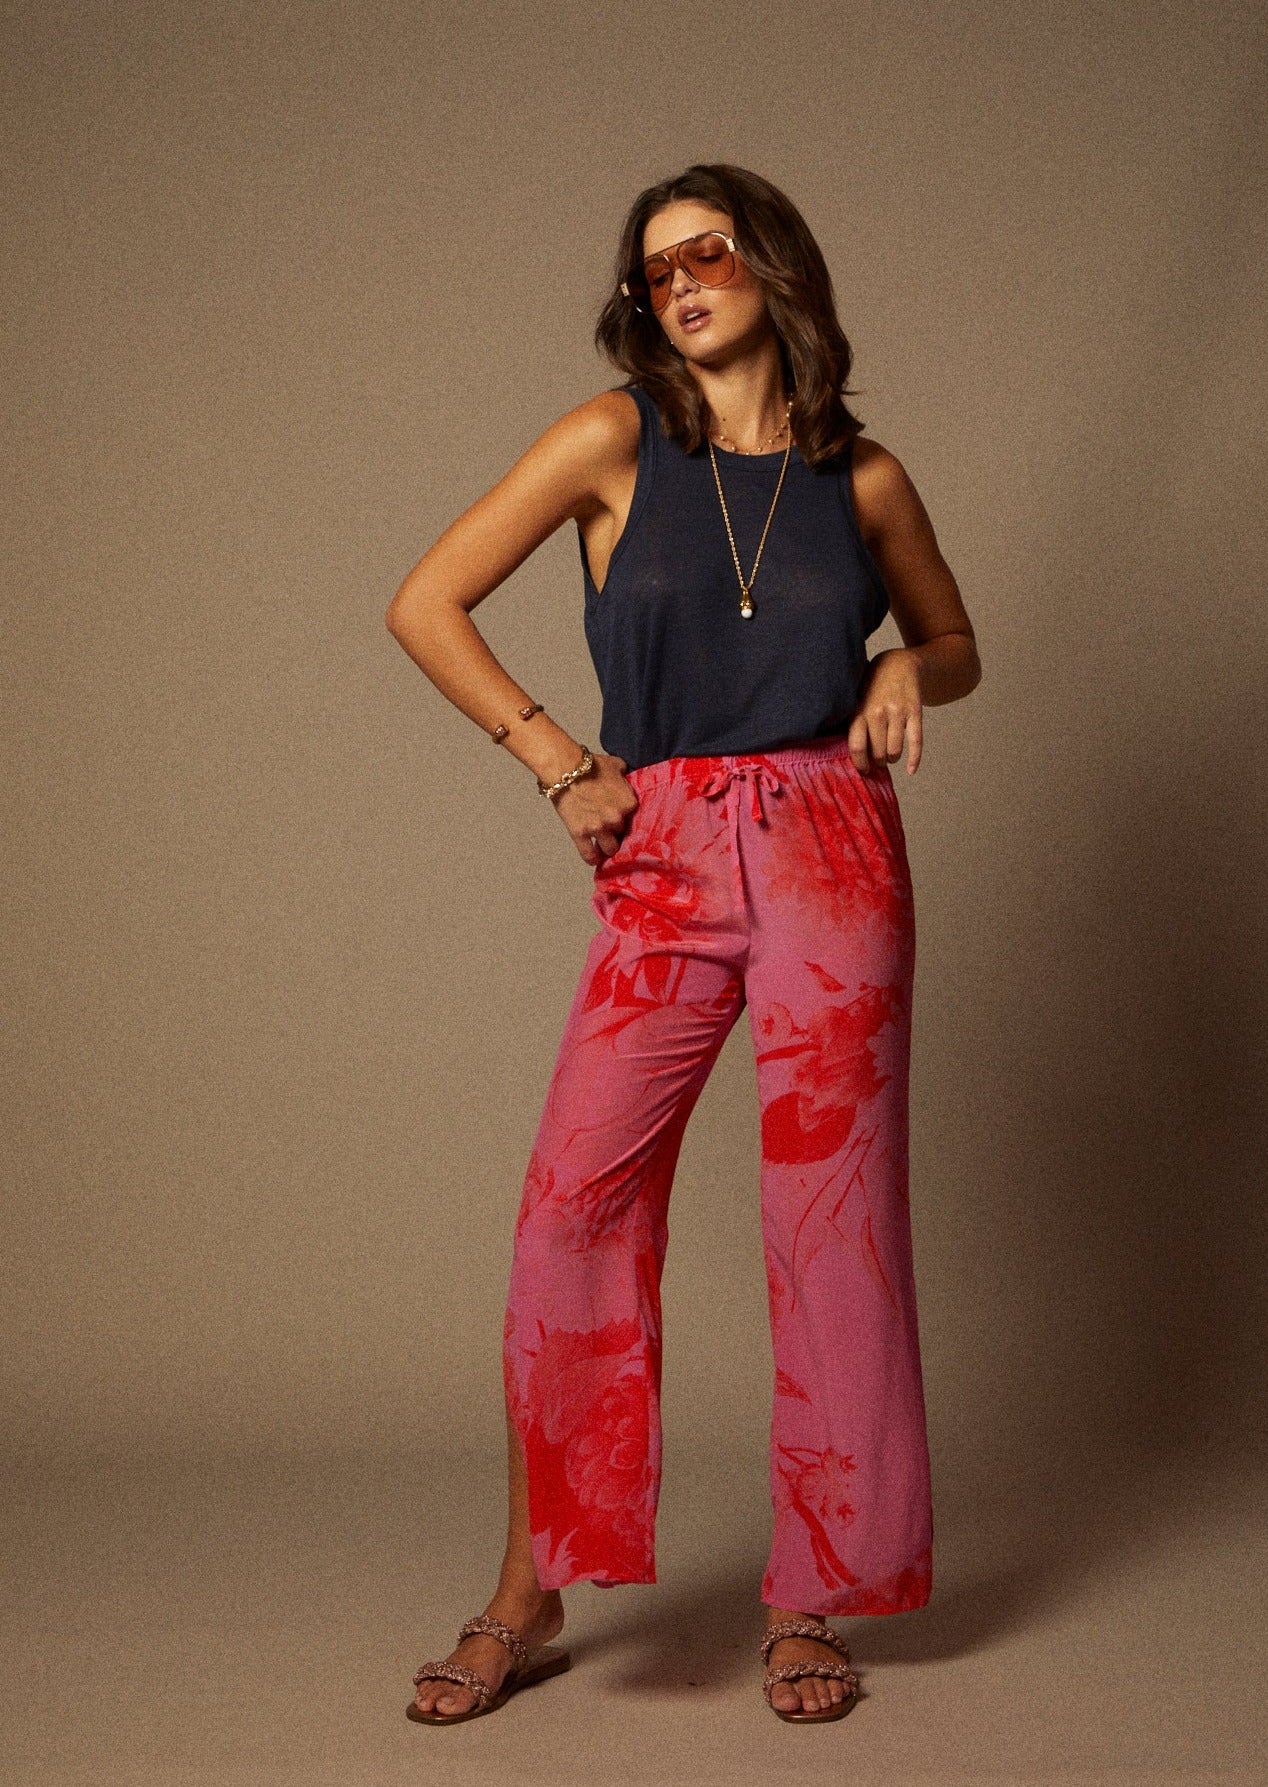 Floral Print Drawstring Wide Leg Pant with Side Slit in Pink and Coral